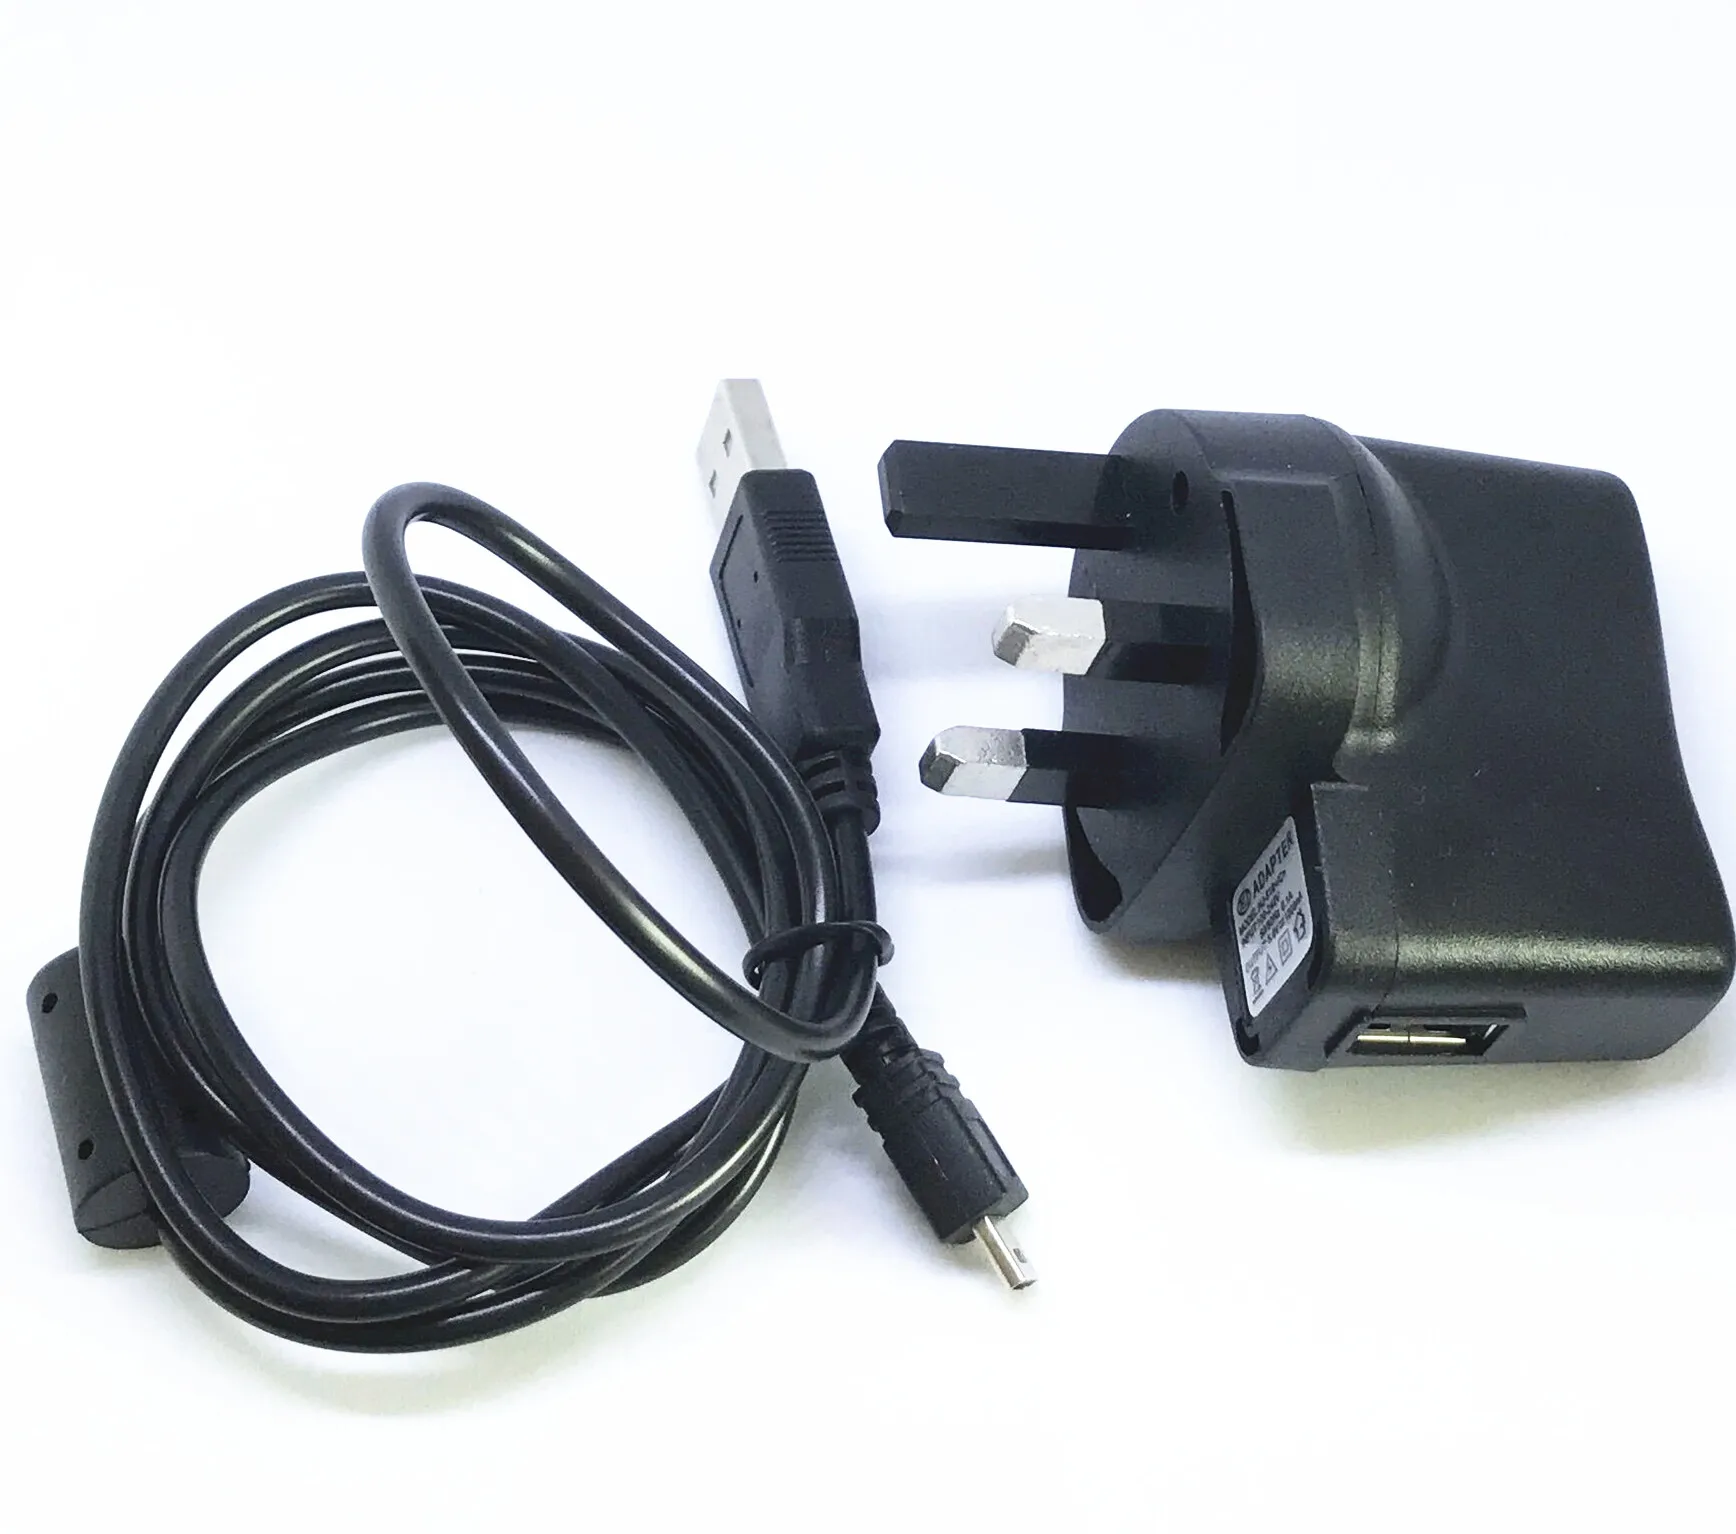  T-Power 5V Charger for Leica D-Lux 2 D-Lux 3 D-Lux 4 C